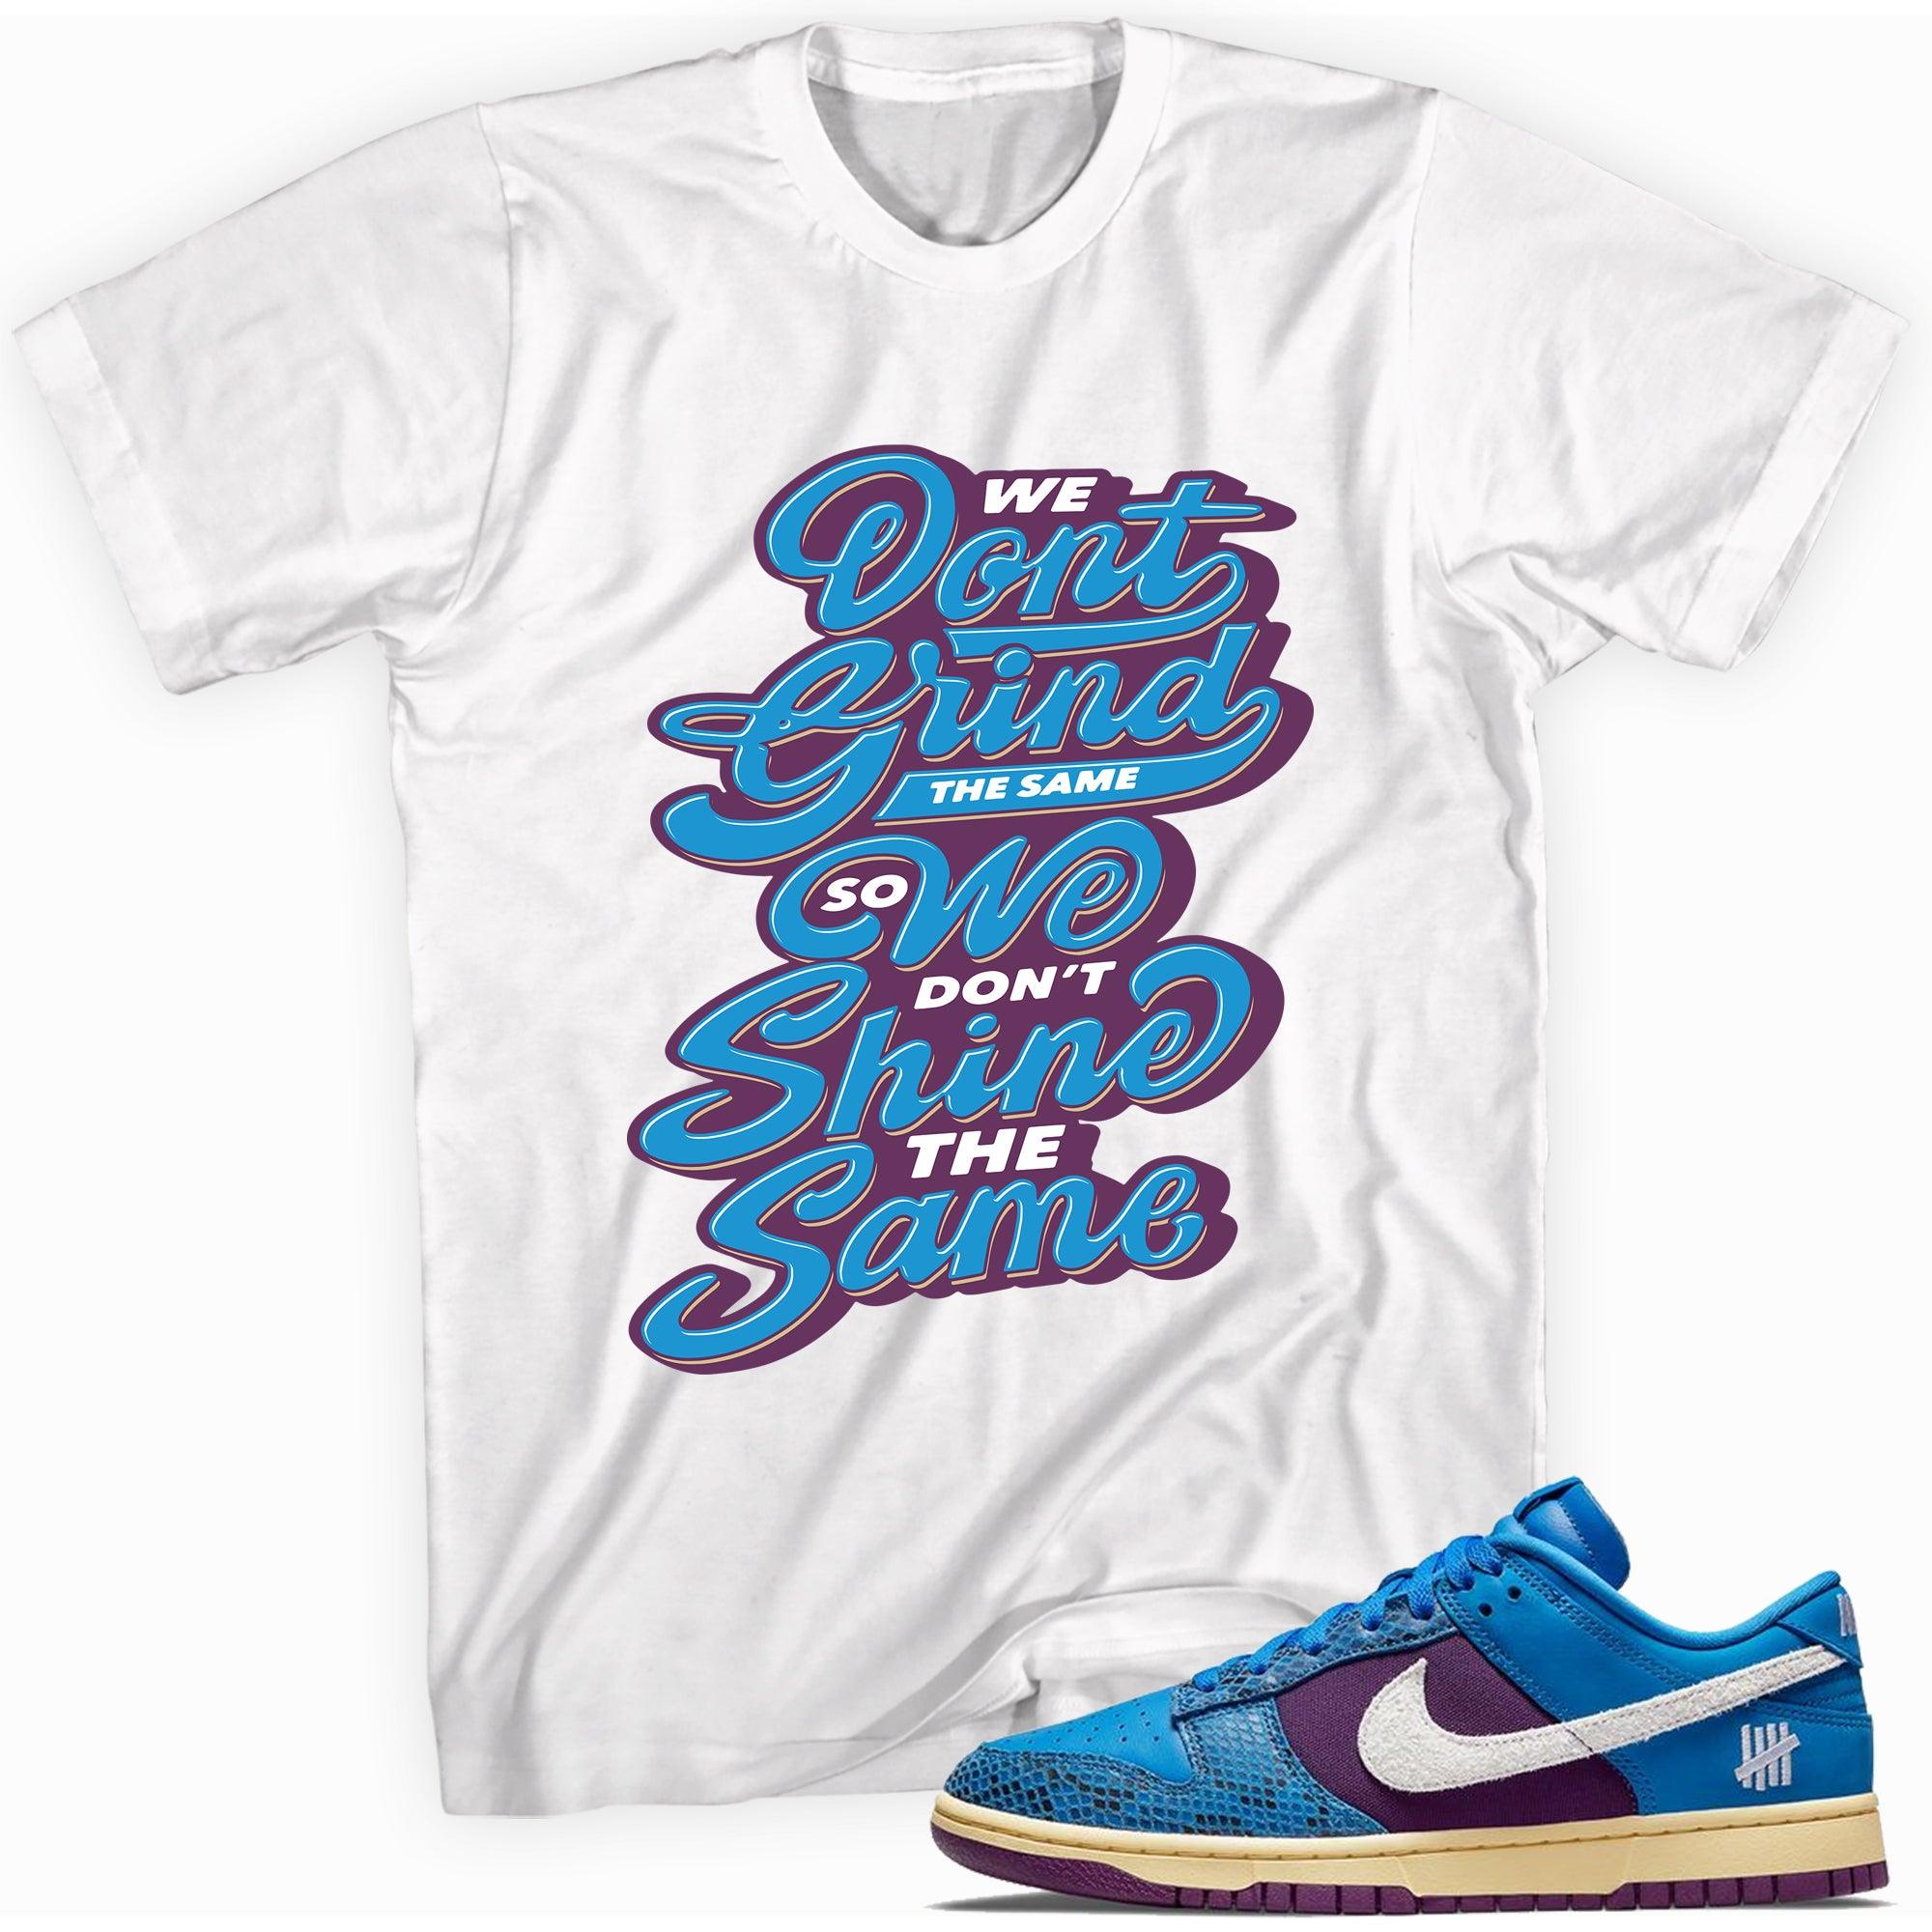 We Grind Shirt Nike Dunk Low Undefeated 5 On It Dunk vs AF1 photo